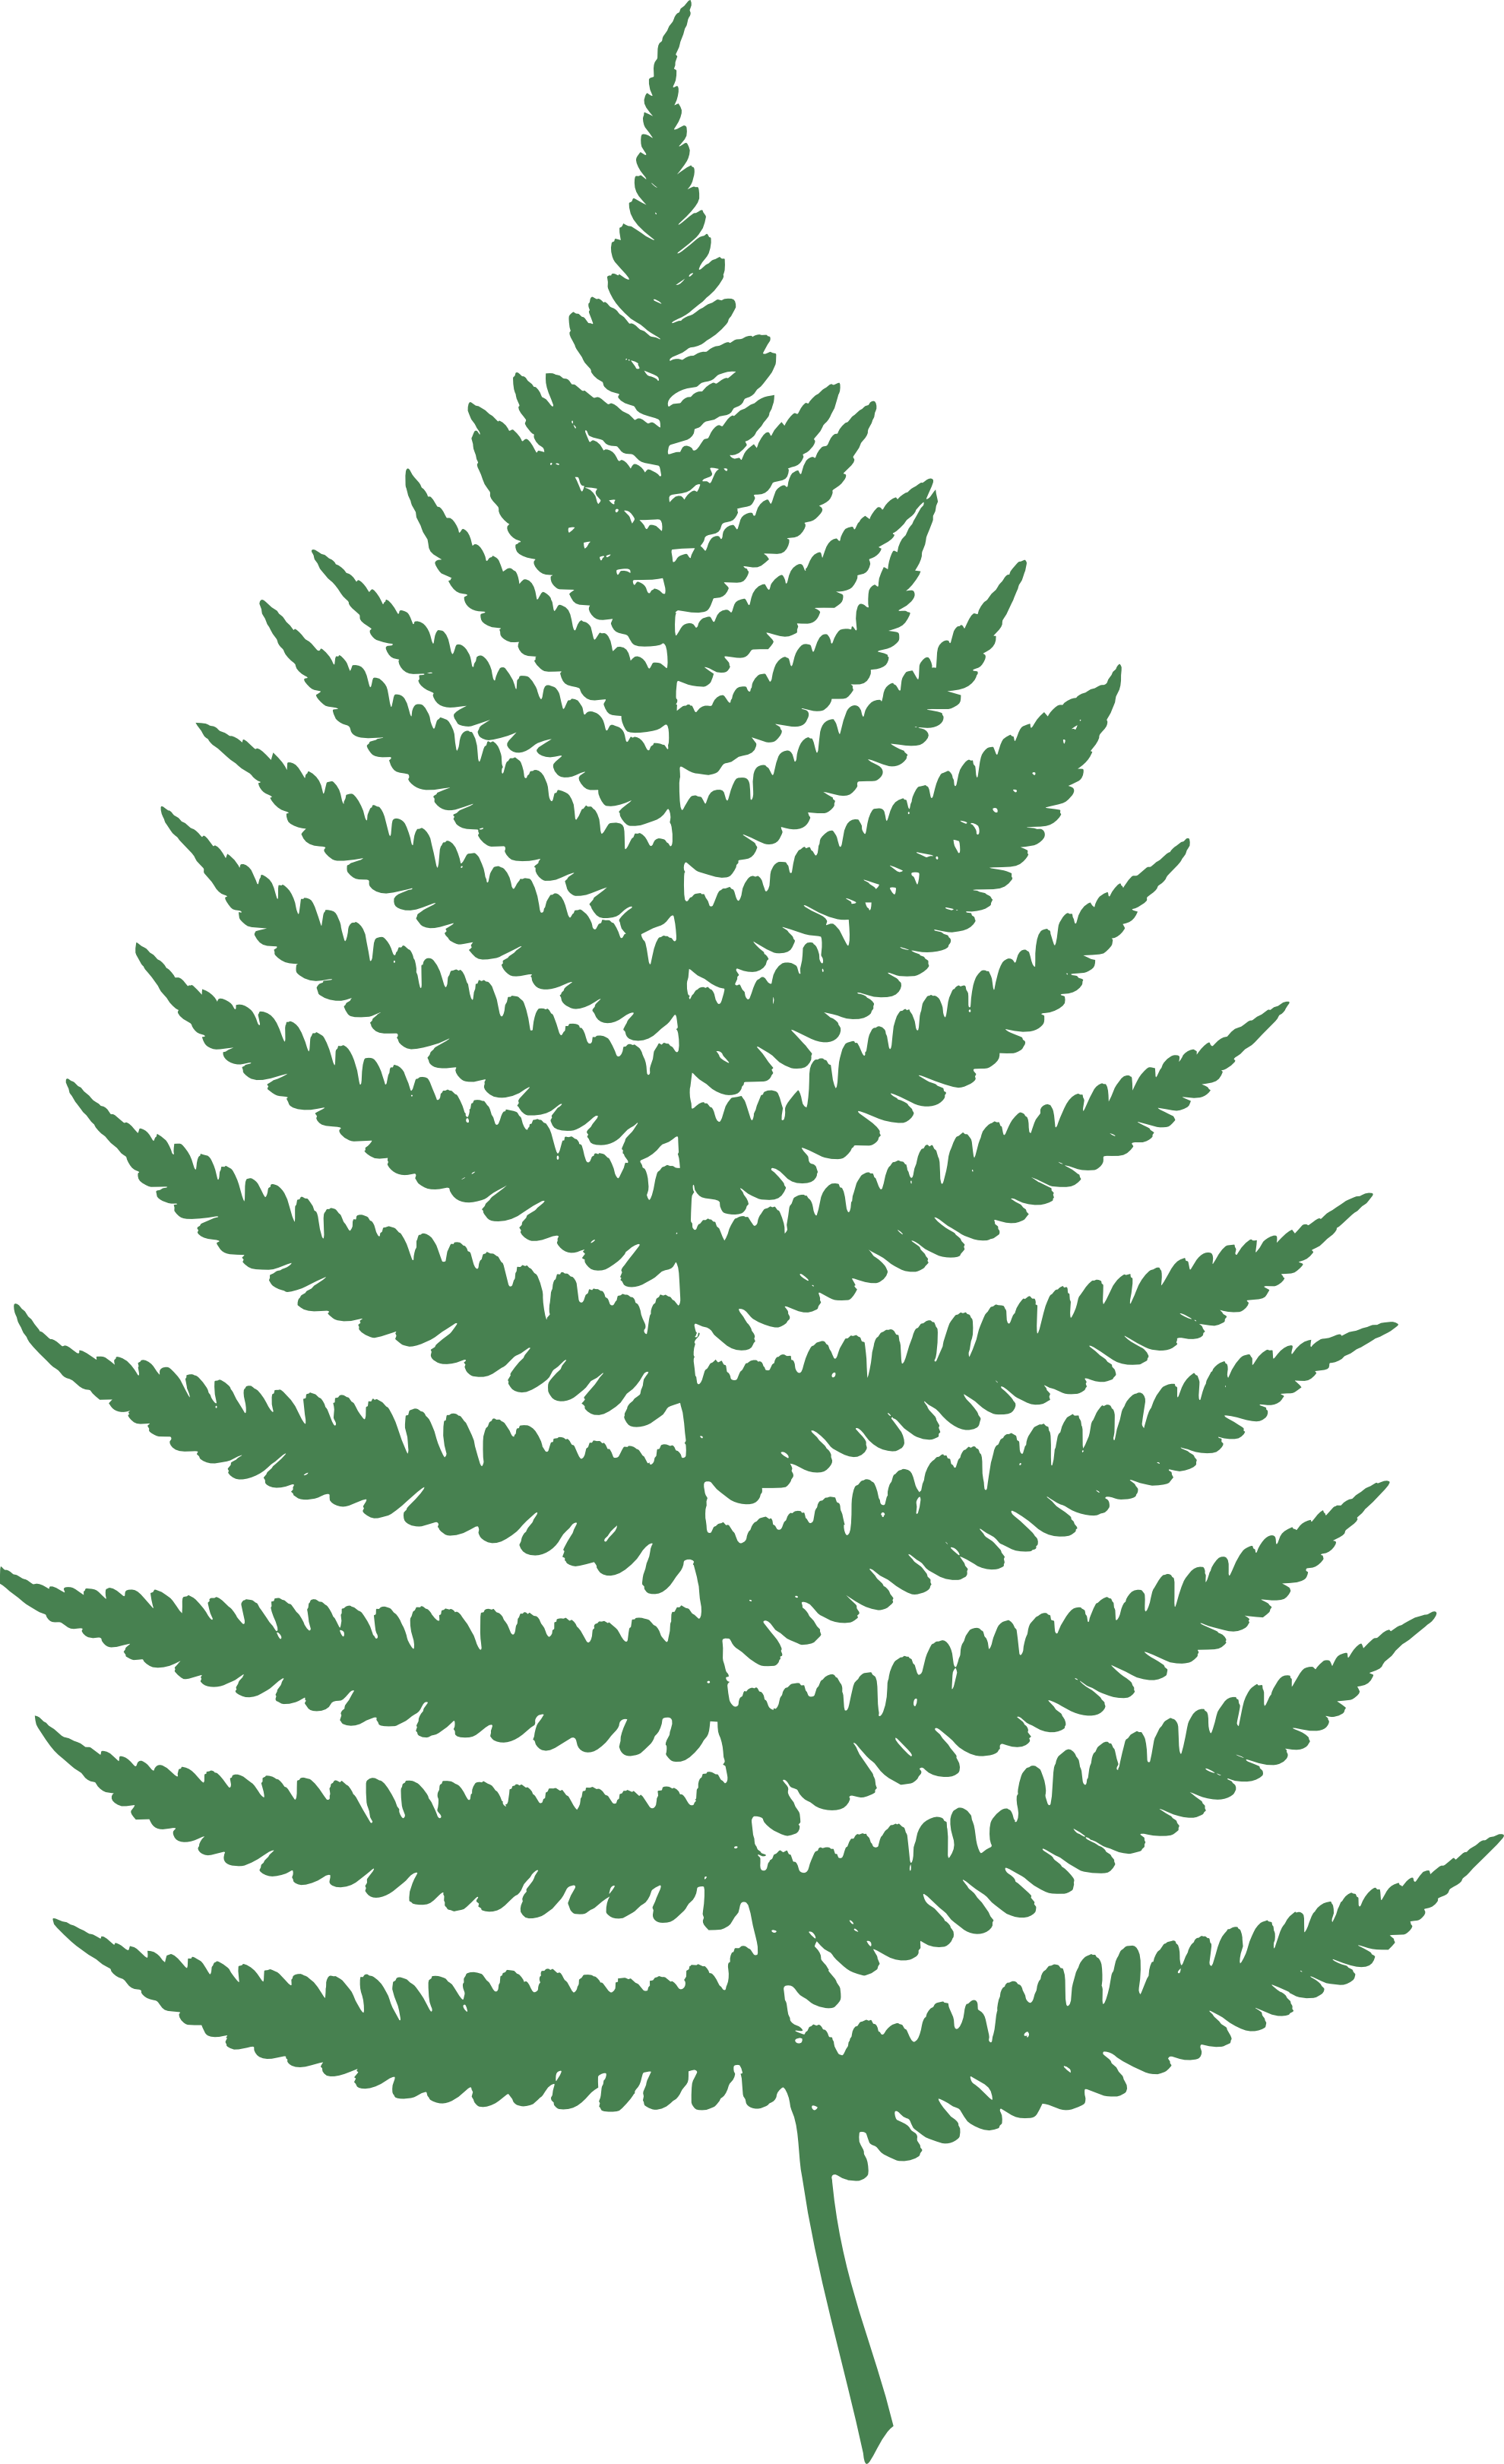 Farn Fern Png 53 K  Farn Fern 555px Png 98 K  Farn Fern 999px Png 196